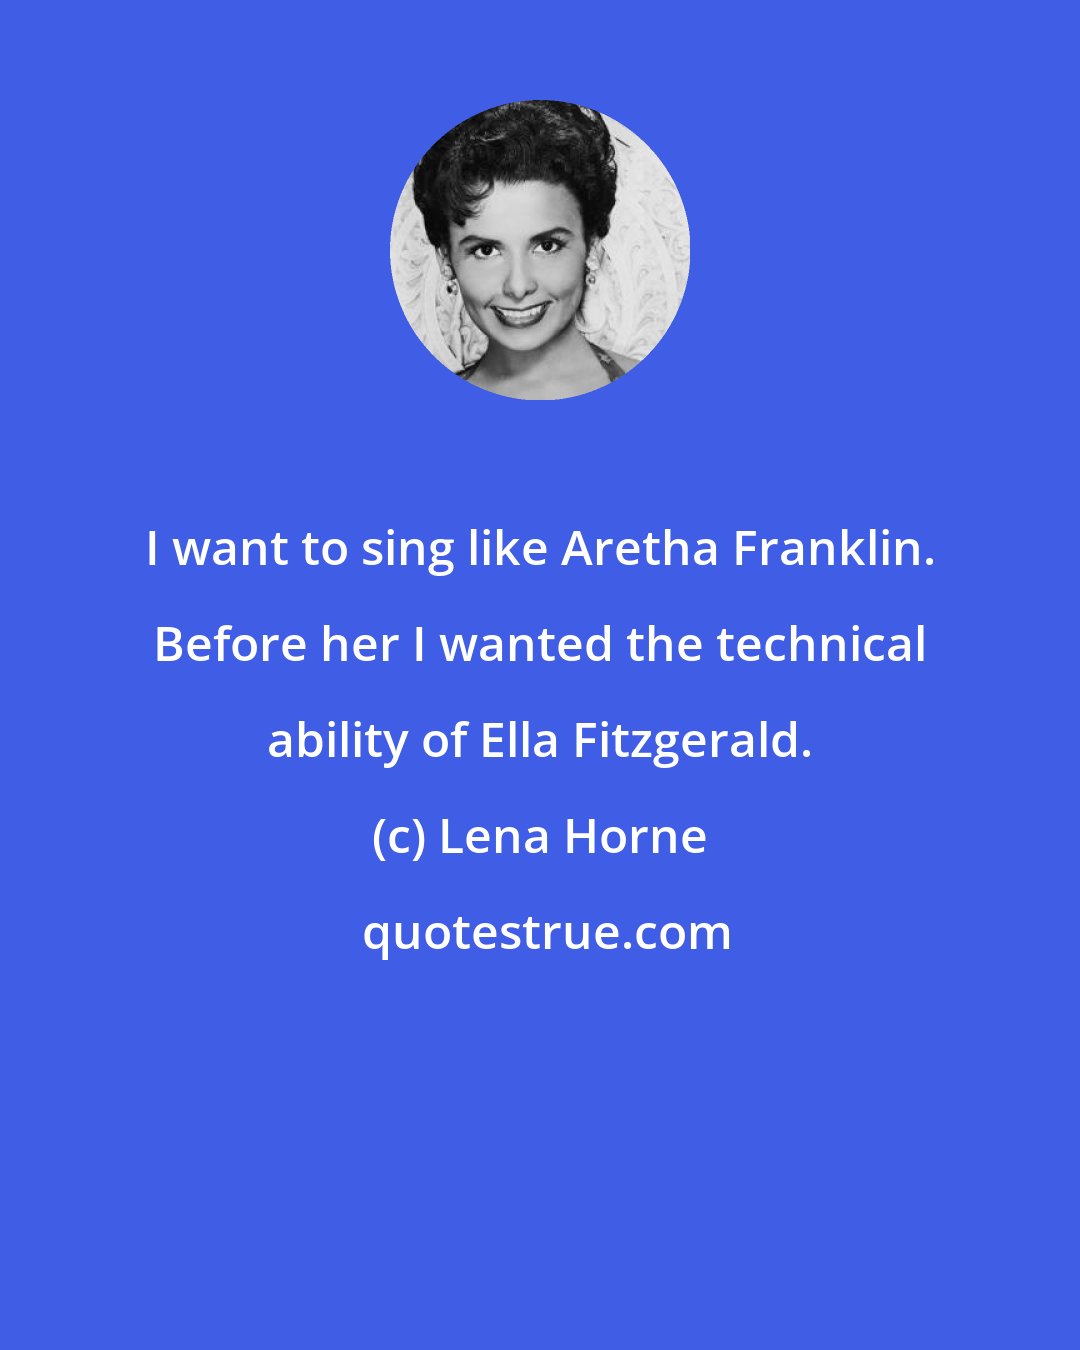 Lena Horne: I want to sing like Aretha Franklin. Before her I wanted the technical ability of Ella Fitzgerald.